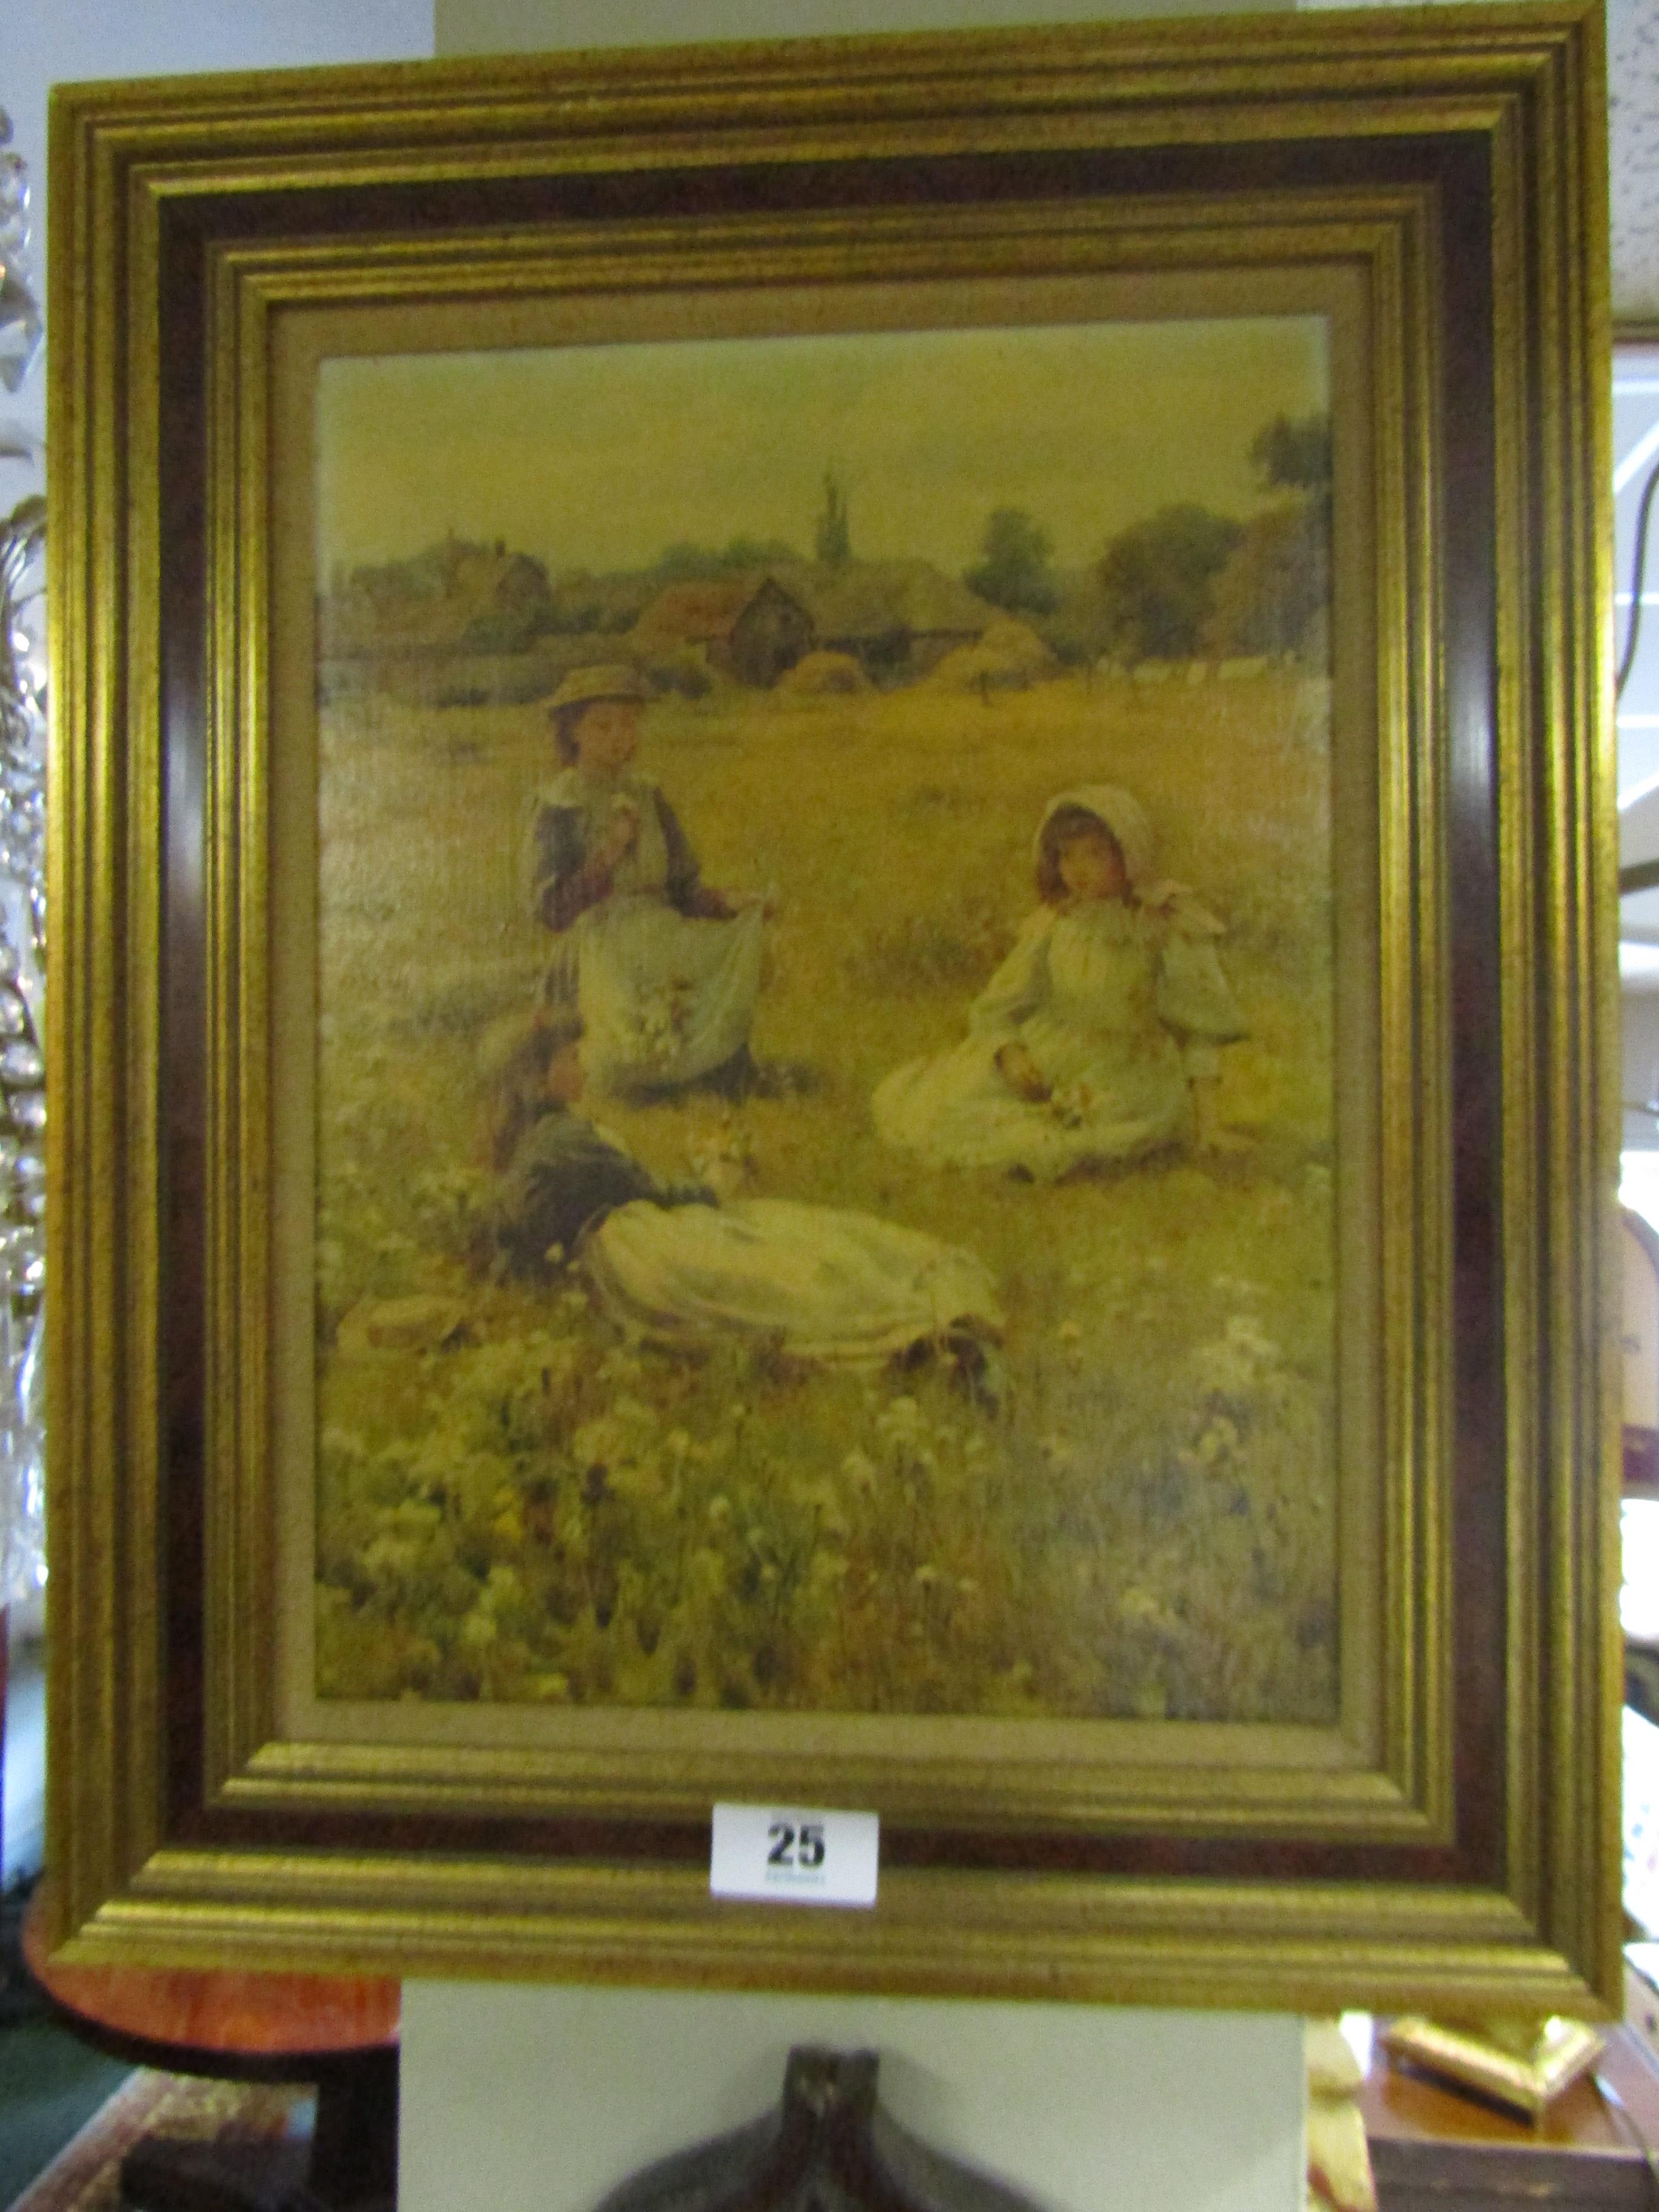 William Affleck Girls in Meadow Oileograph in Gilded Frame 16 Inches High x 12 Inches Wide - Image 2 of 2